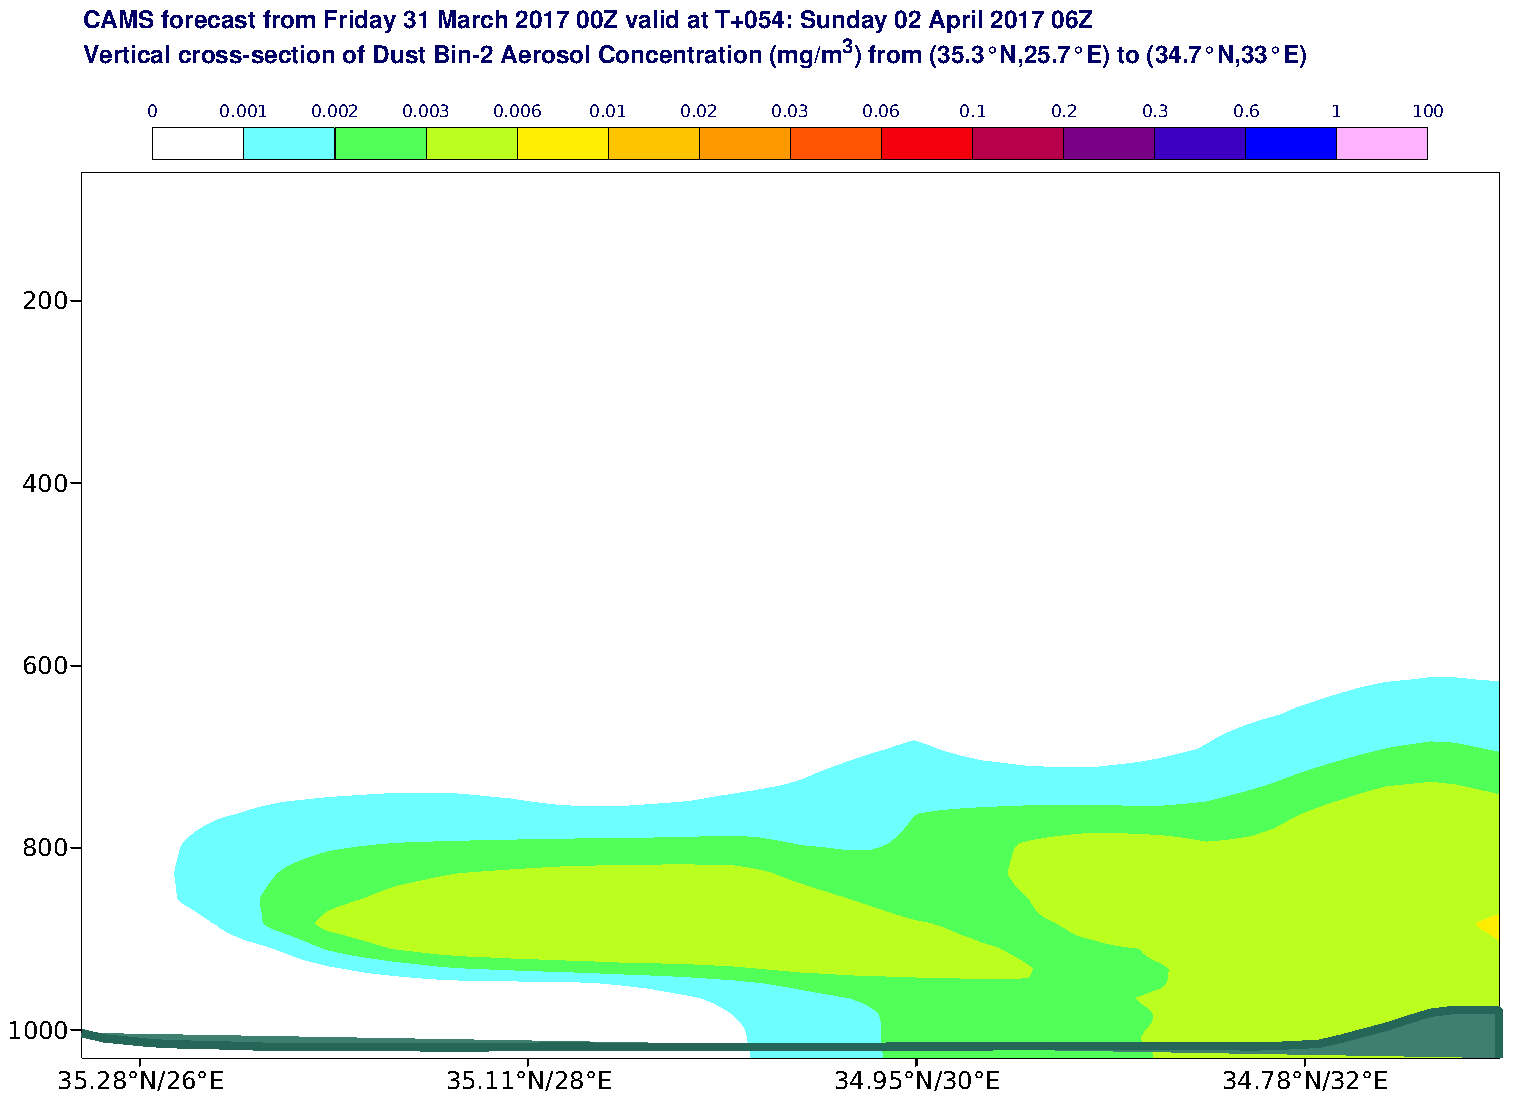 Vertical cross-section of Dust Bin-2 Aerosol Concentration (mg/m3) valid at T54 - 2017-04-02 06:00